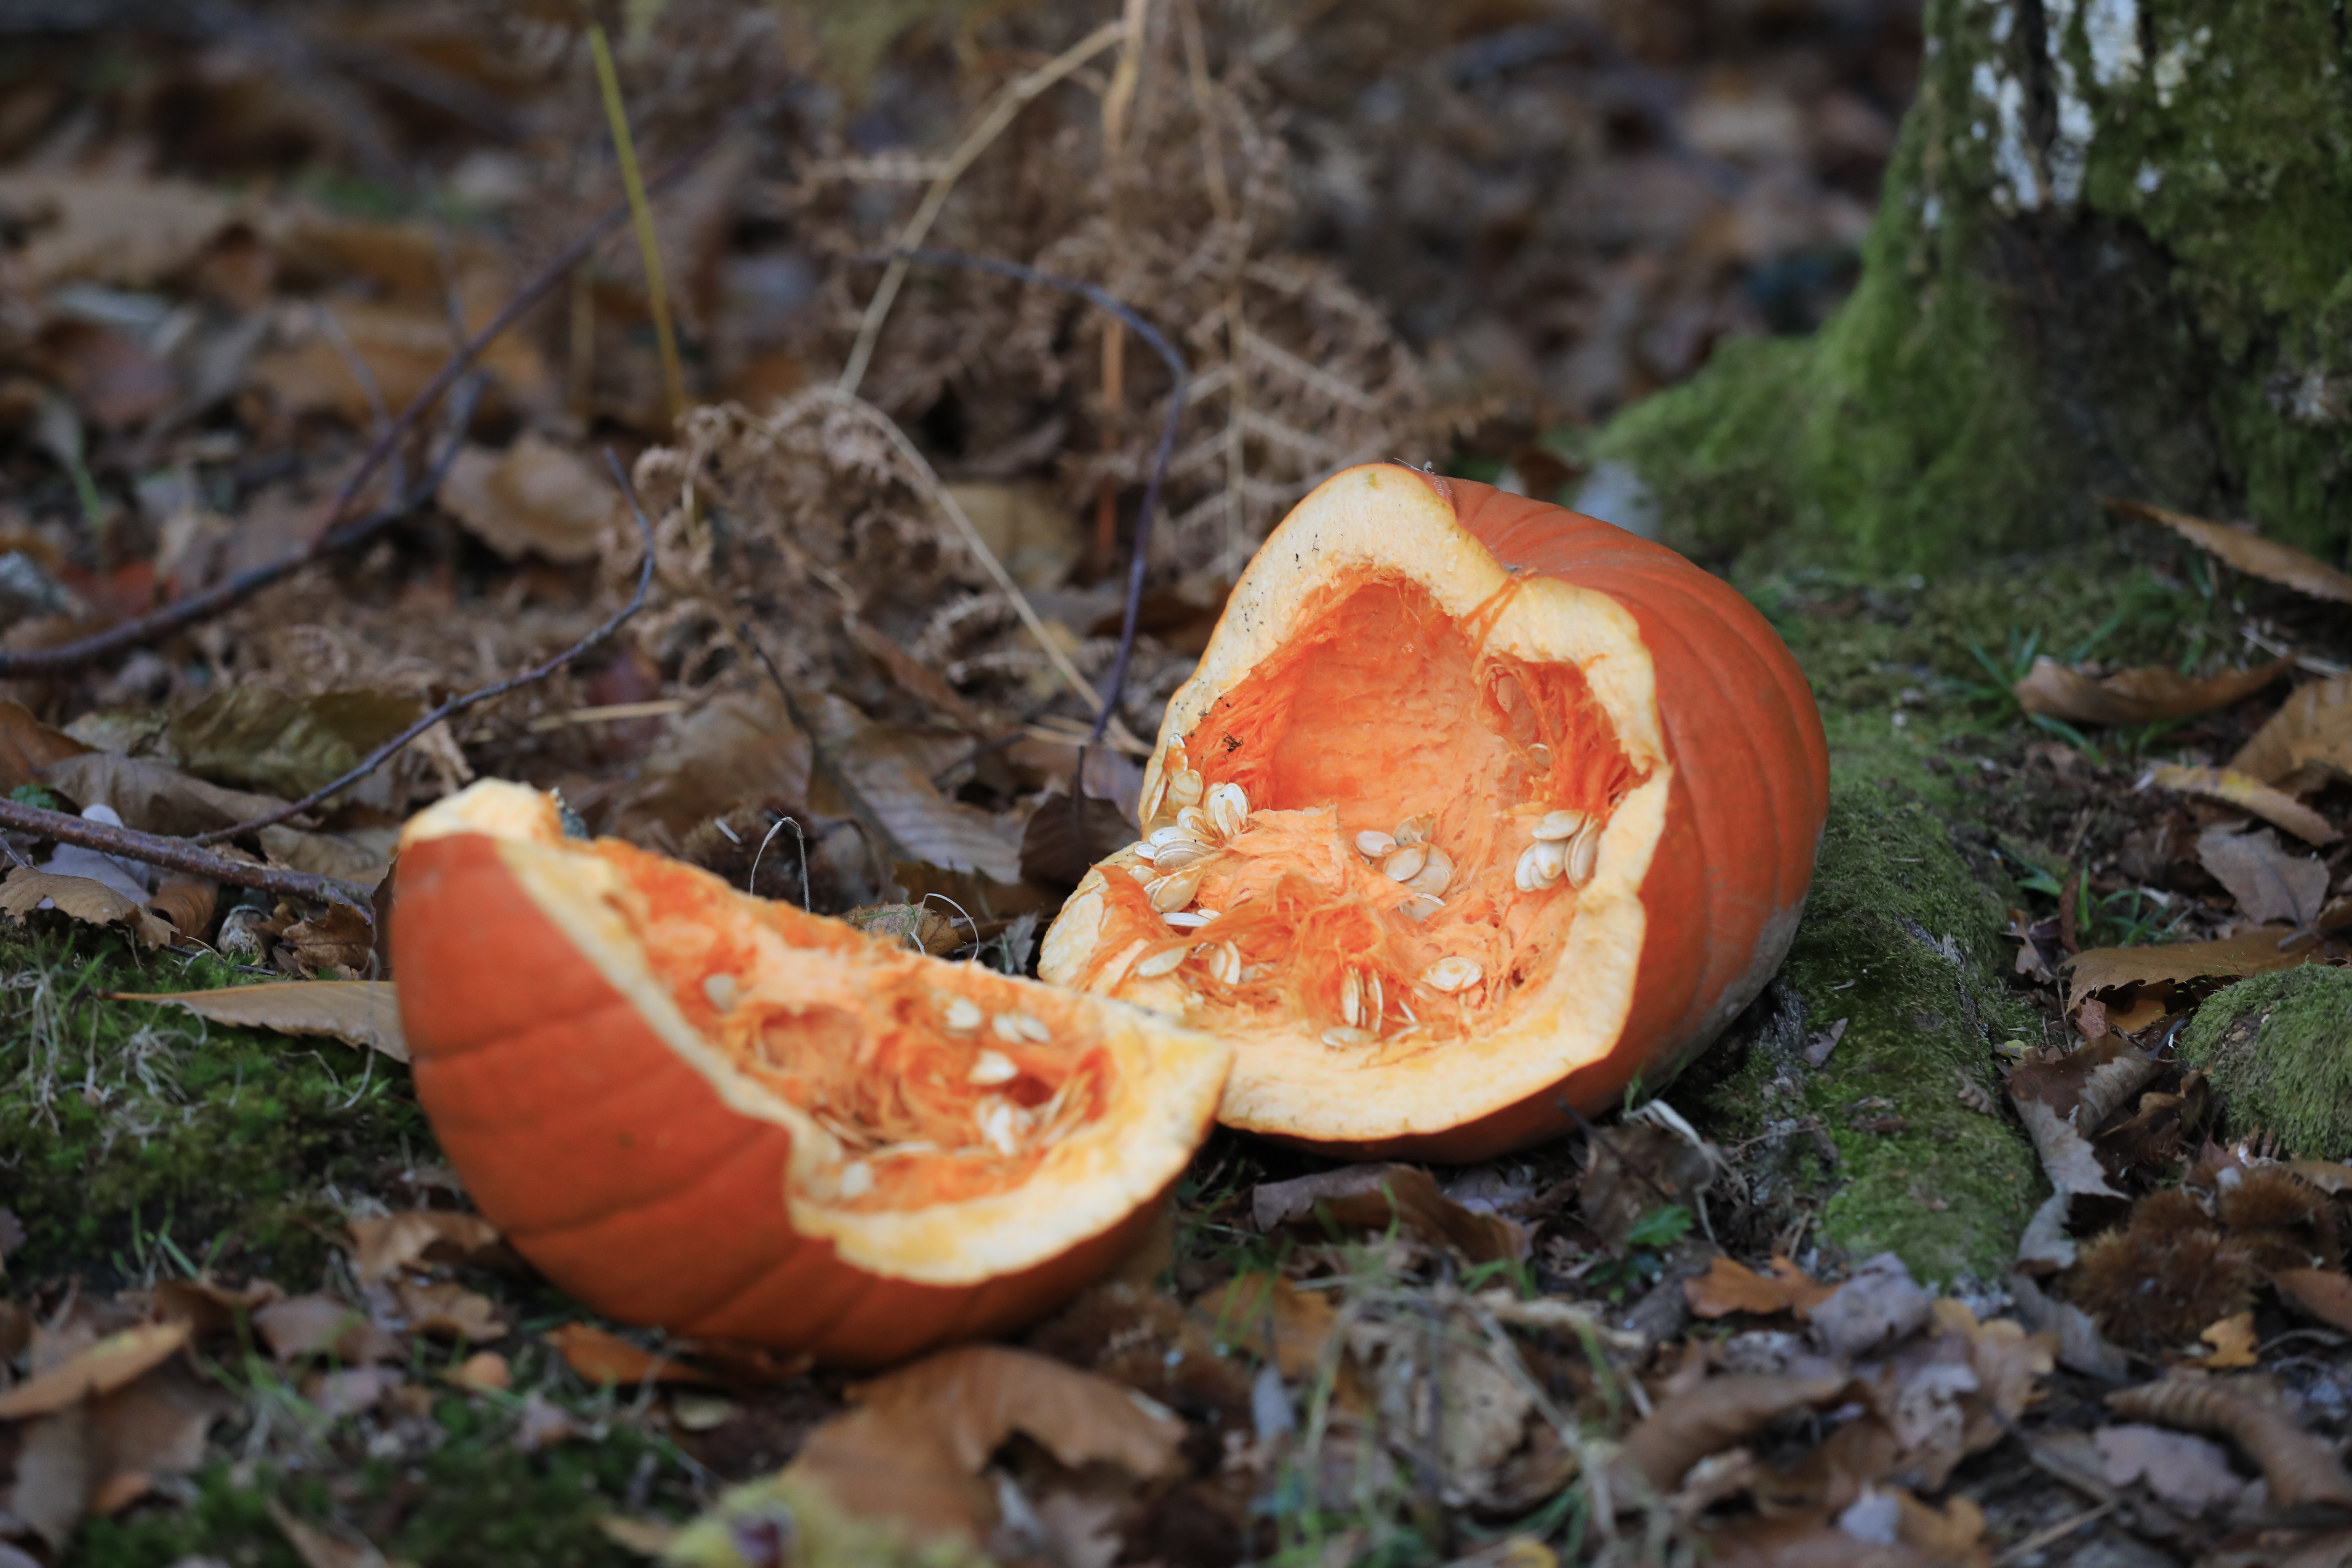 Dumping pumpkins in the woods is bad for wildlife says Forestry England  expert | Forestry England